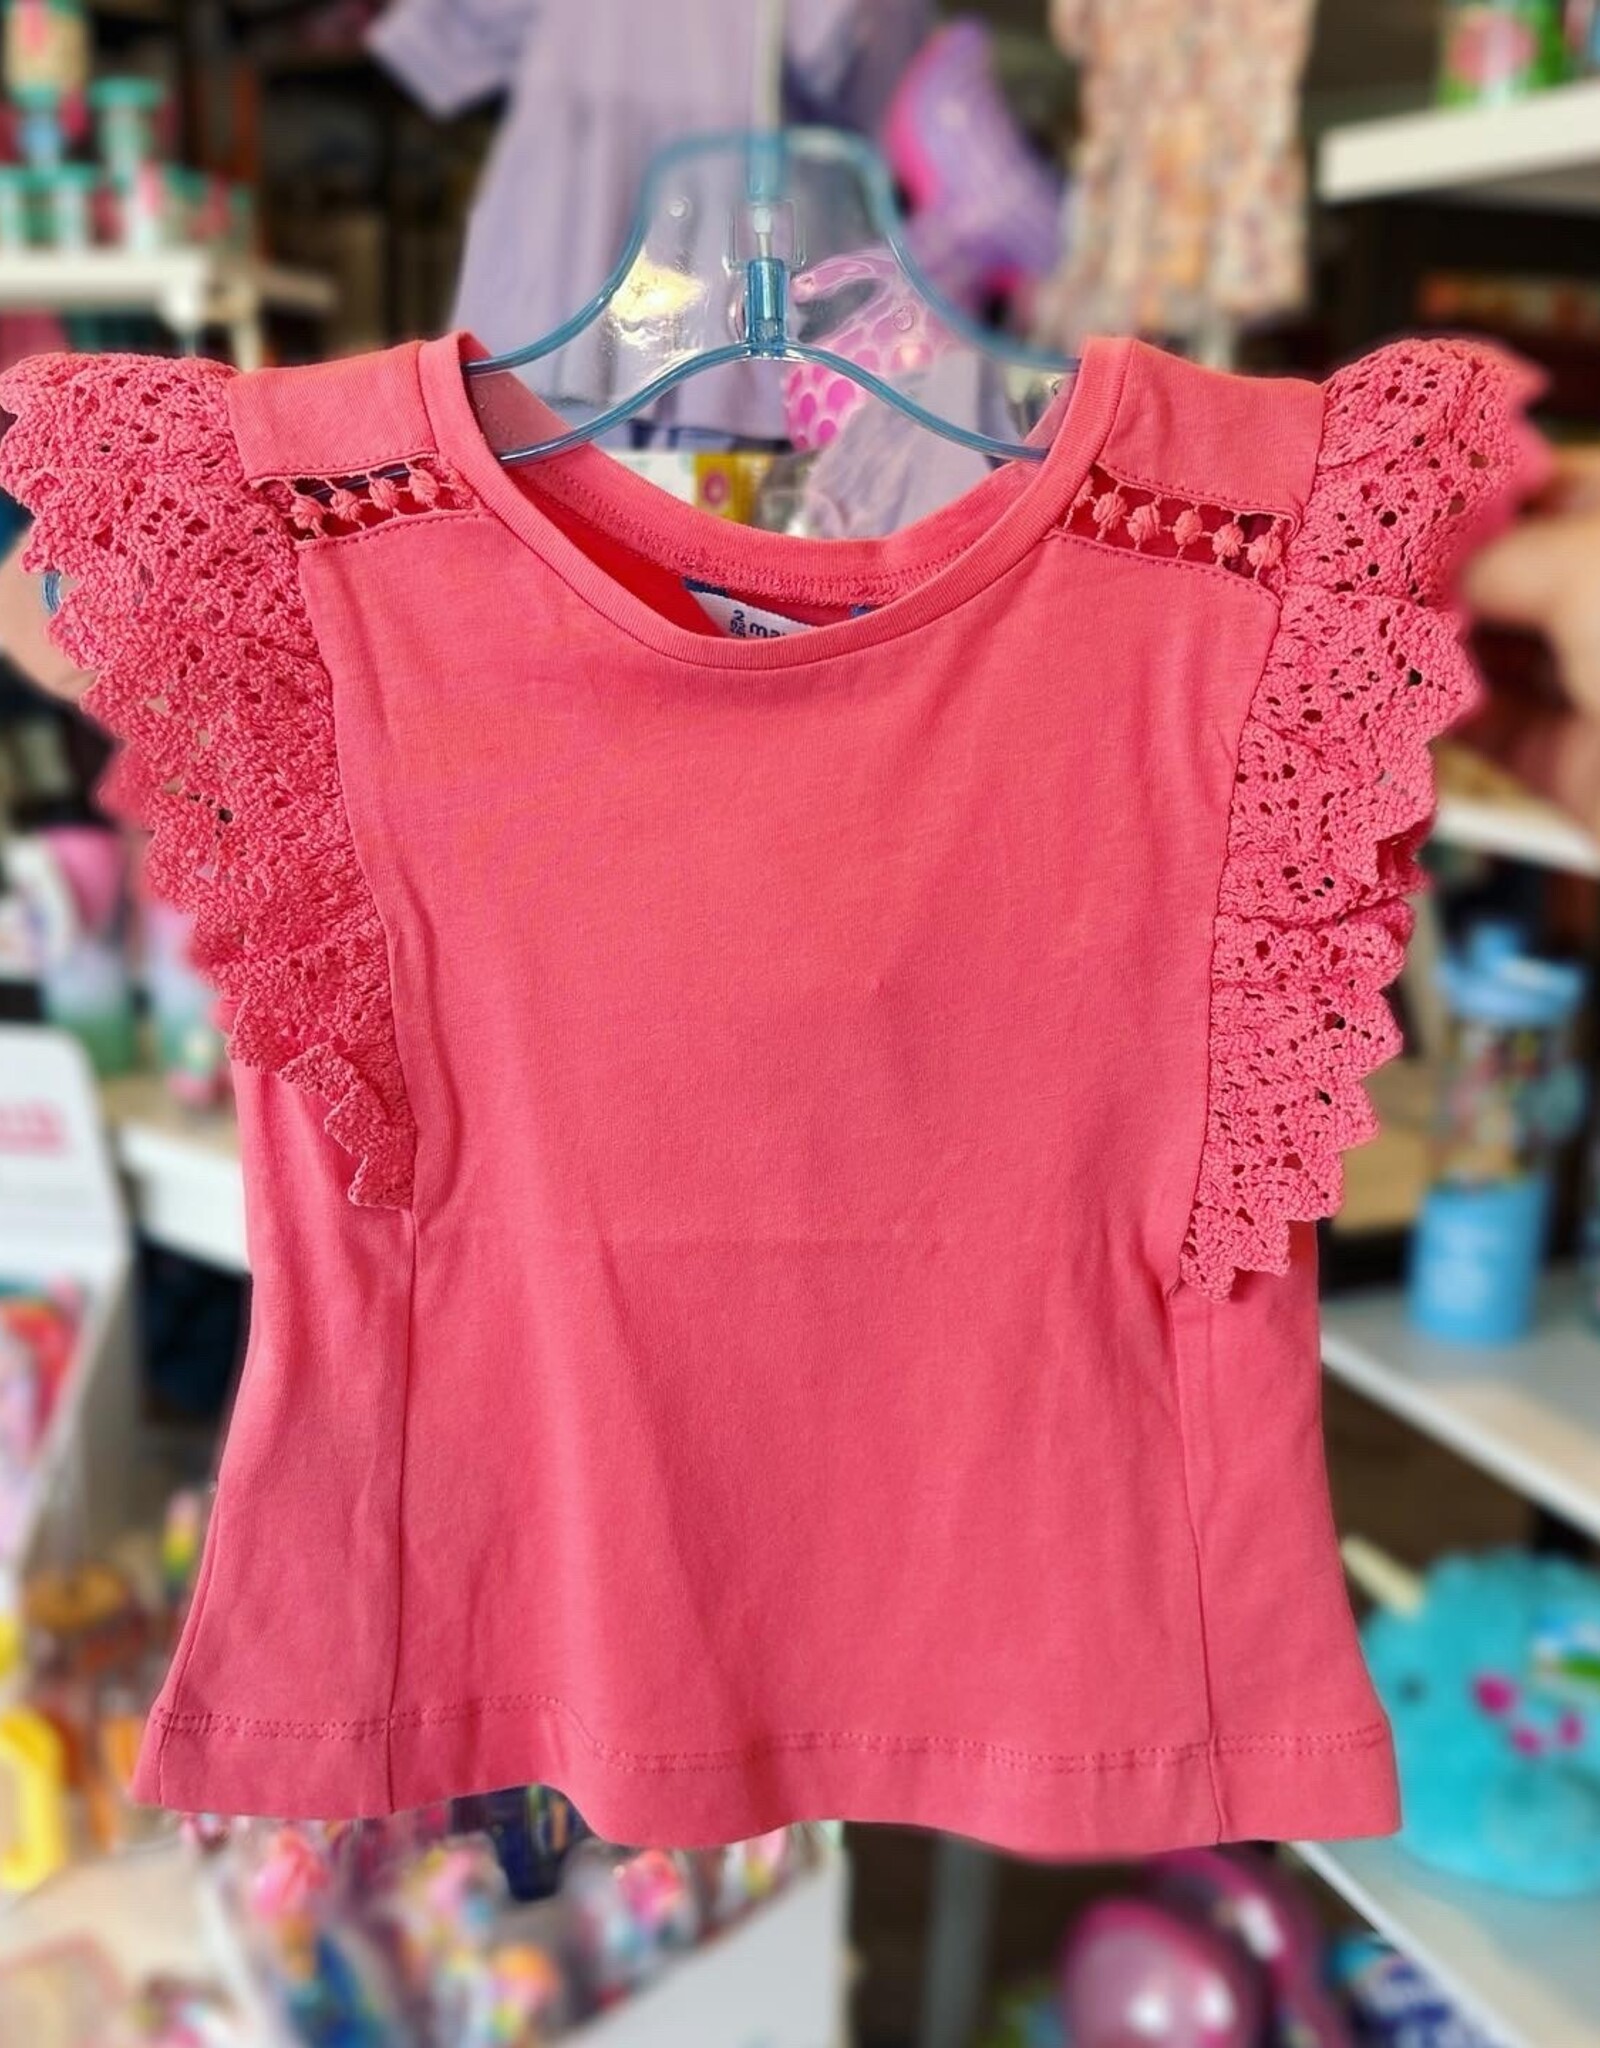 Mayoral Lizzy Top in Coral